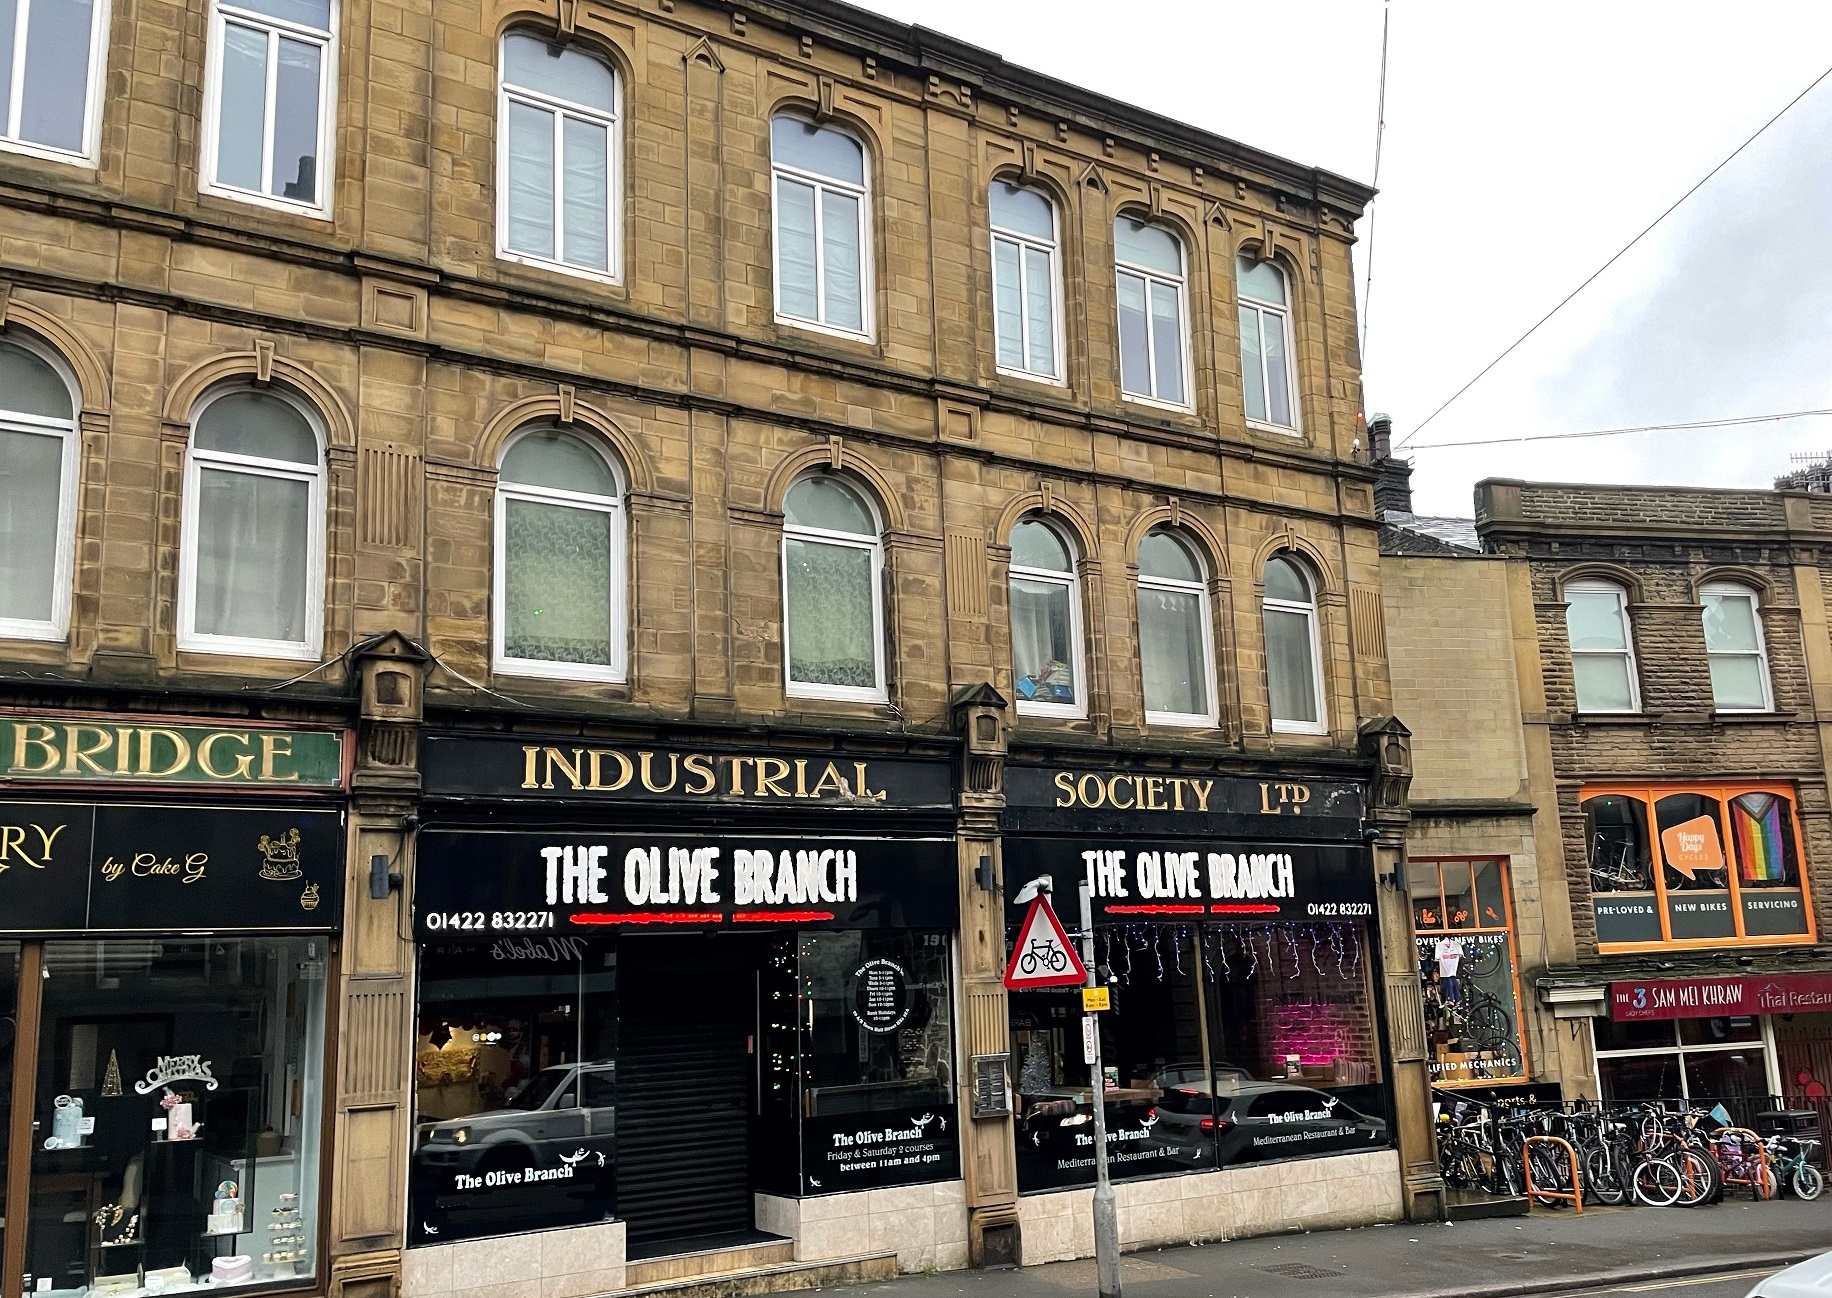 Olive Branch restaurant in Sowerby Bridge with heritage sign revealed